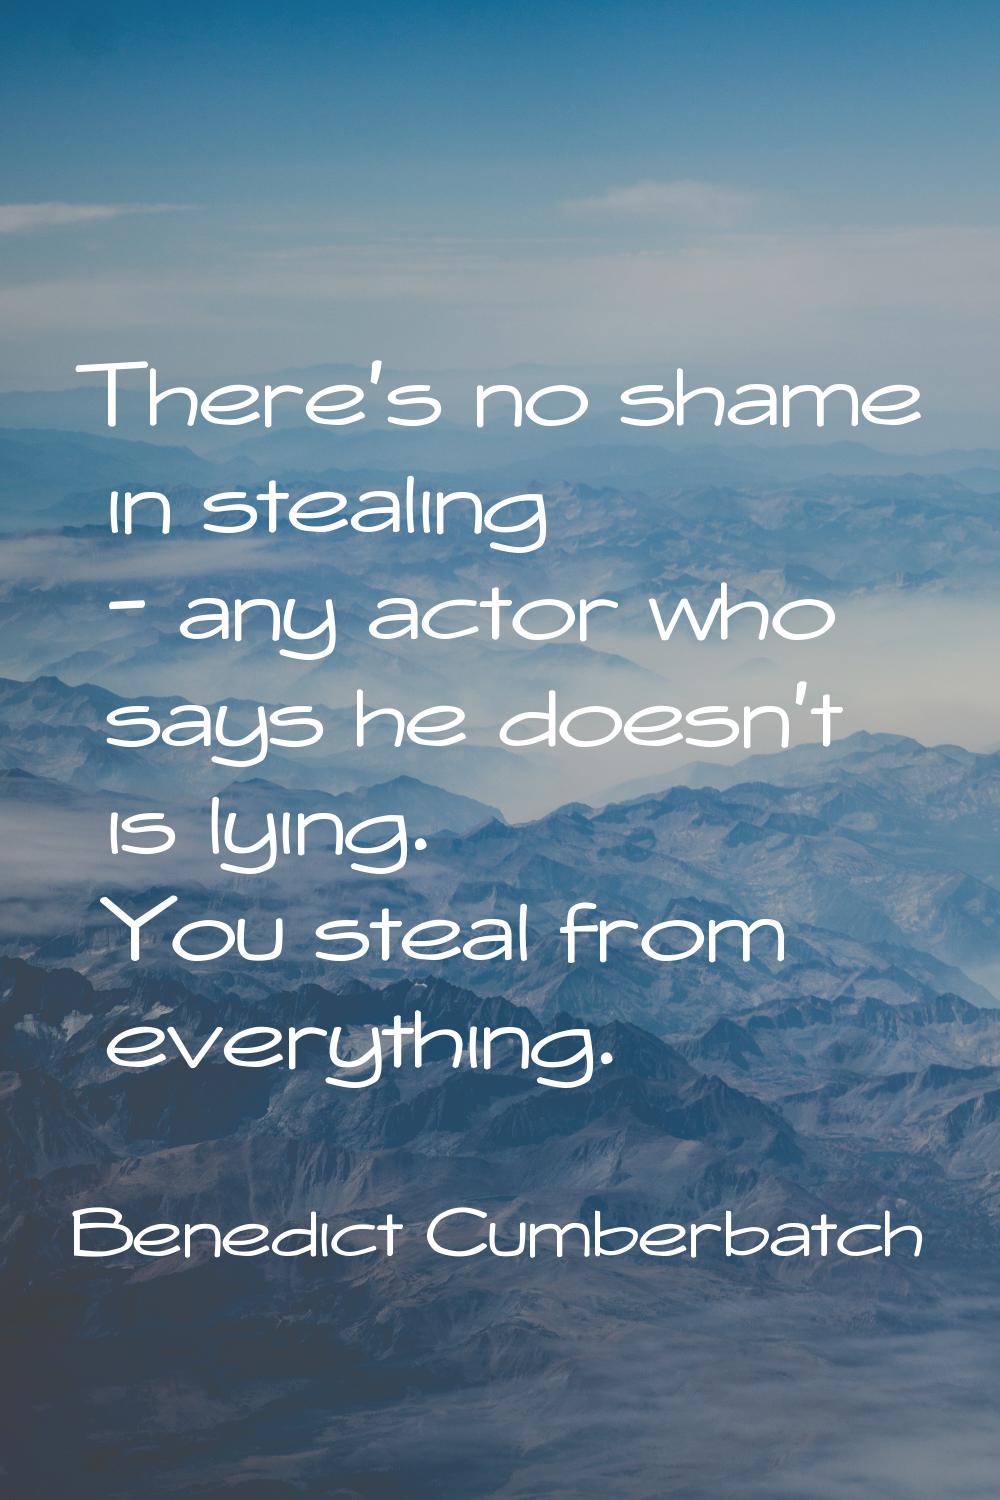 There's no shame in stealing - any actor who says he doesn't is lying. You steal from everything.